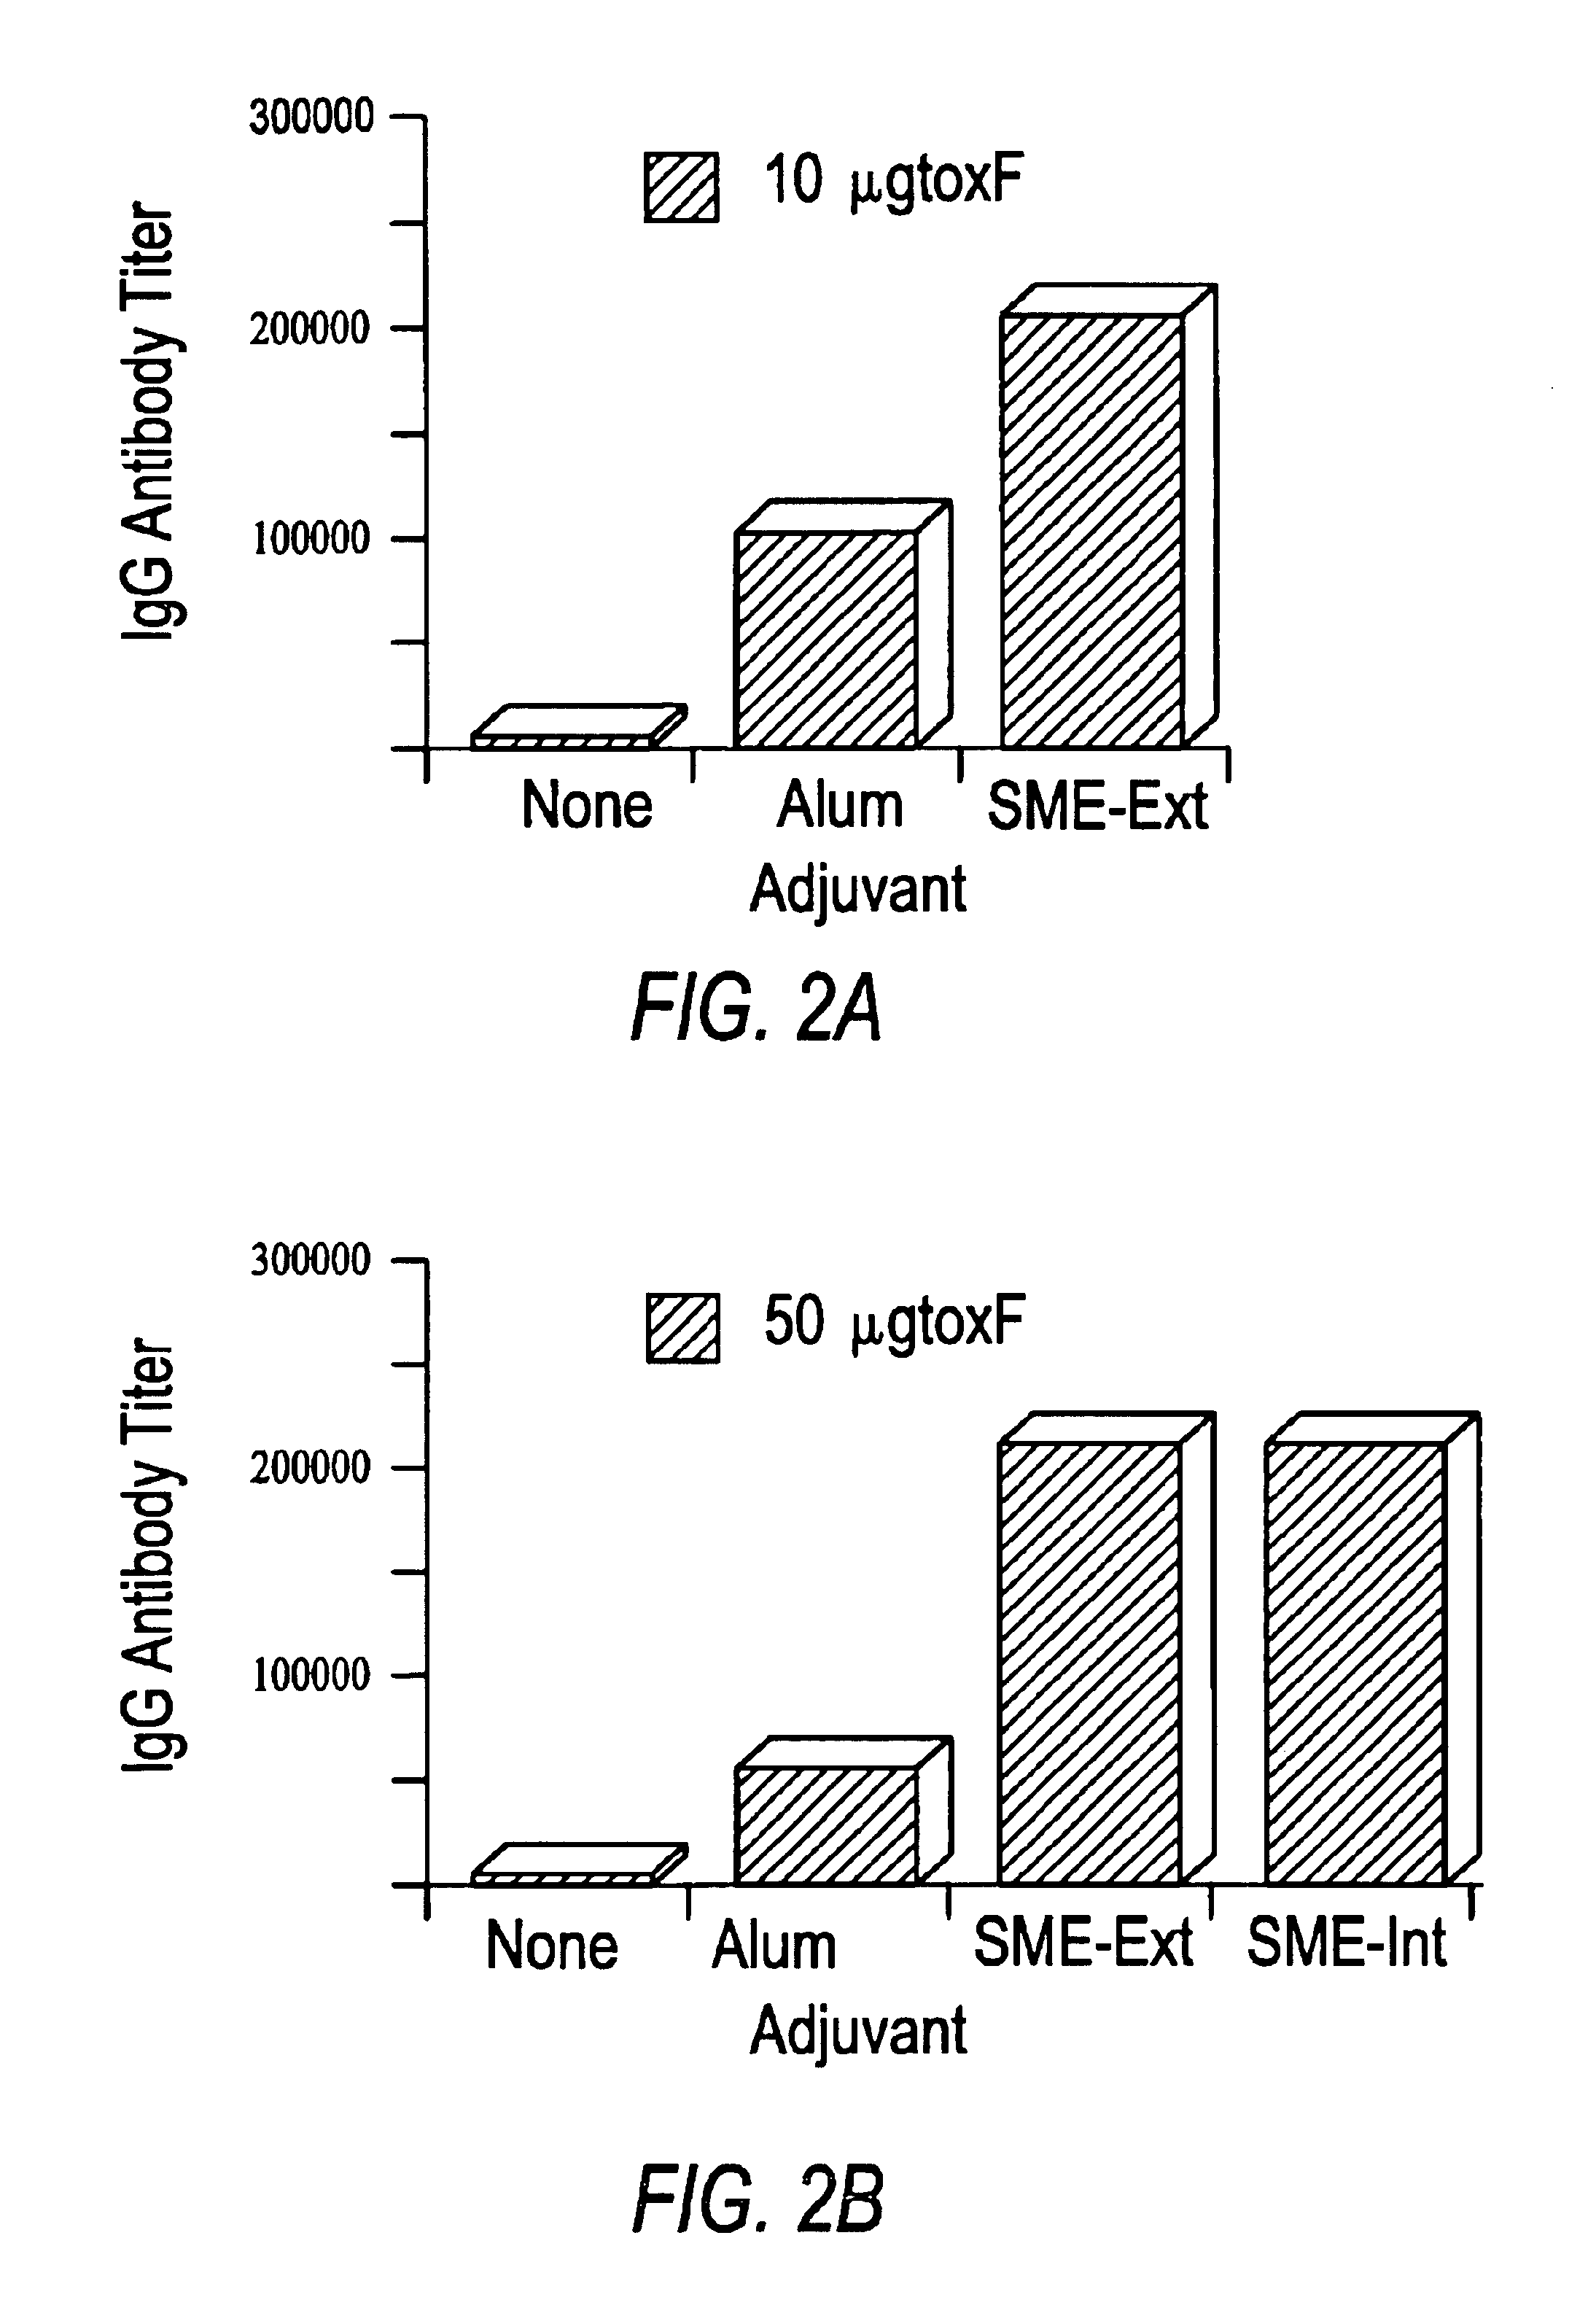 Oral or intranasal vaccines using hydrophobic complexes having proteosomes and lipopolysaccharides